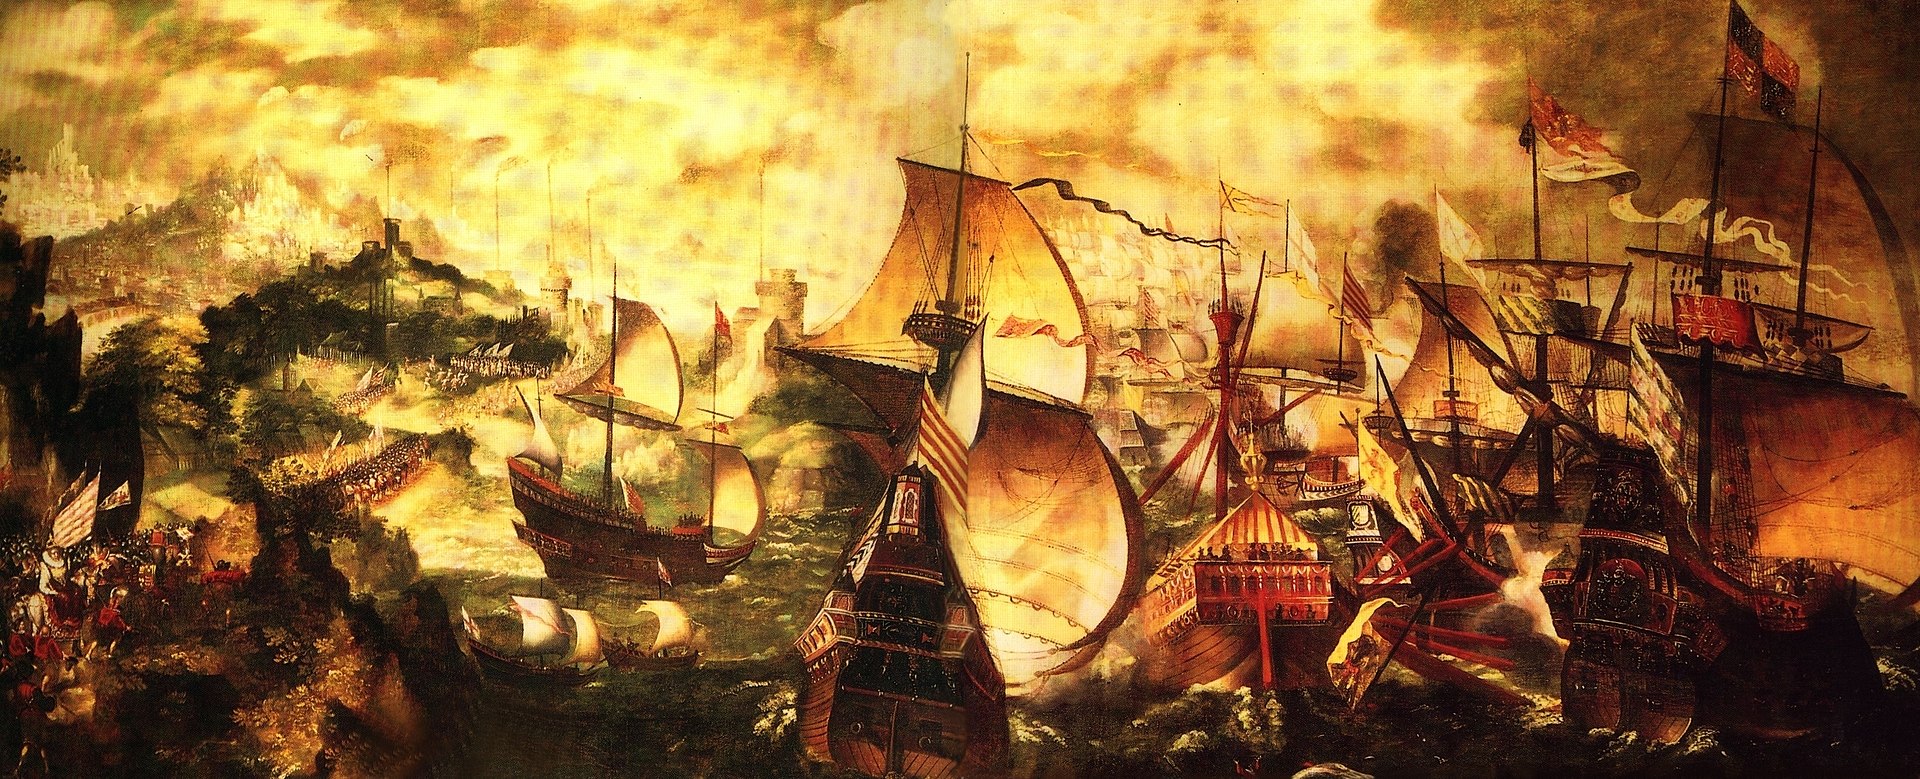 Elizabeth I and the Spanish Armada; the Apothecaries painting, sometimes attributed to Nicholas Hilliard. A stylised depiction of key elements of the Armada story: the alarm beacons, Queen Elizabeth at Tilbury, and the sea battle at Gravelines.